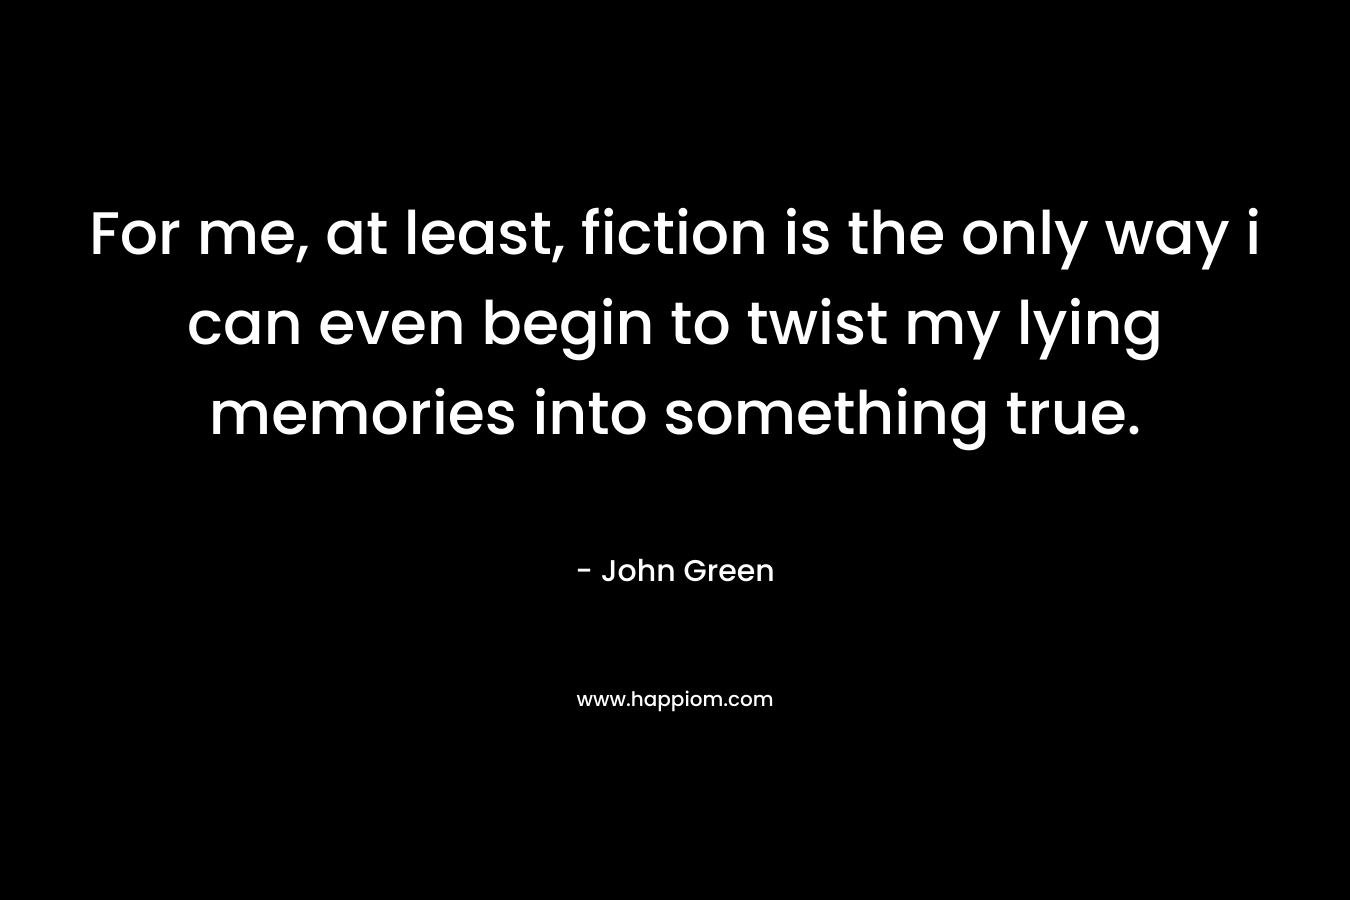 For me, at least, fiction is the only way i can even begin to twist my lying memories into something true.